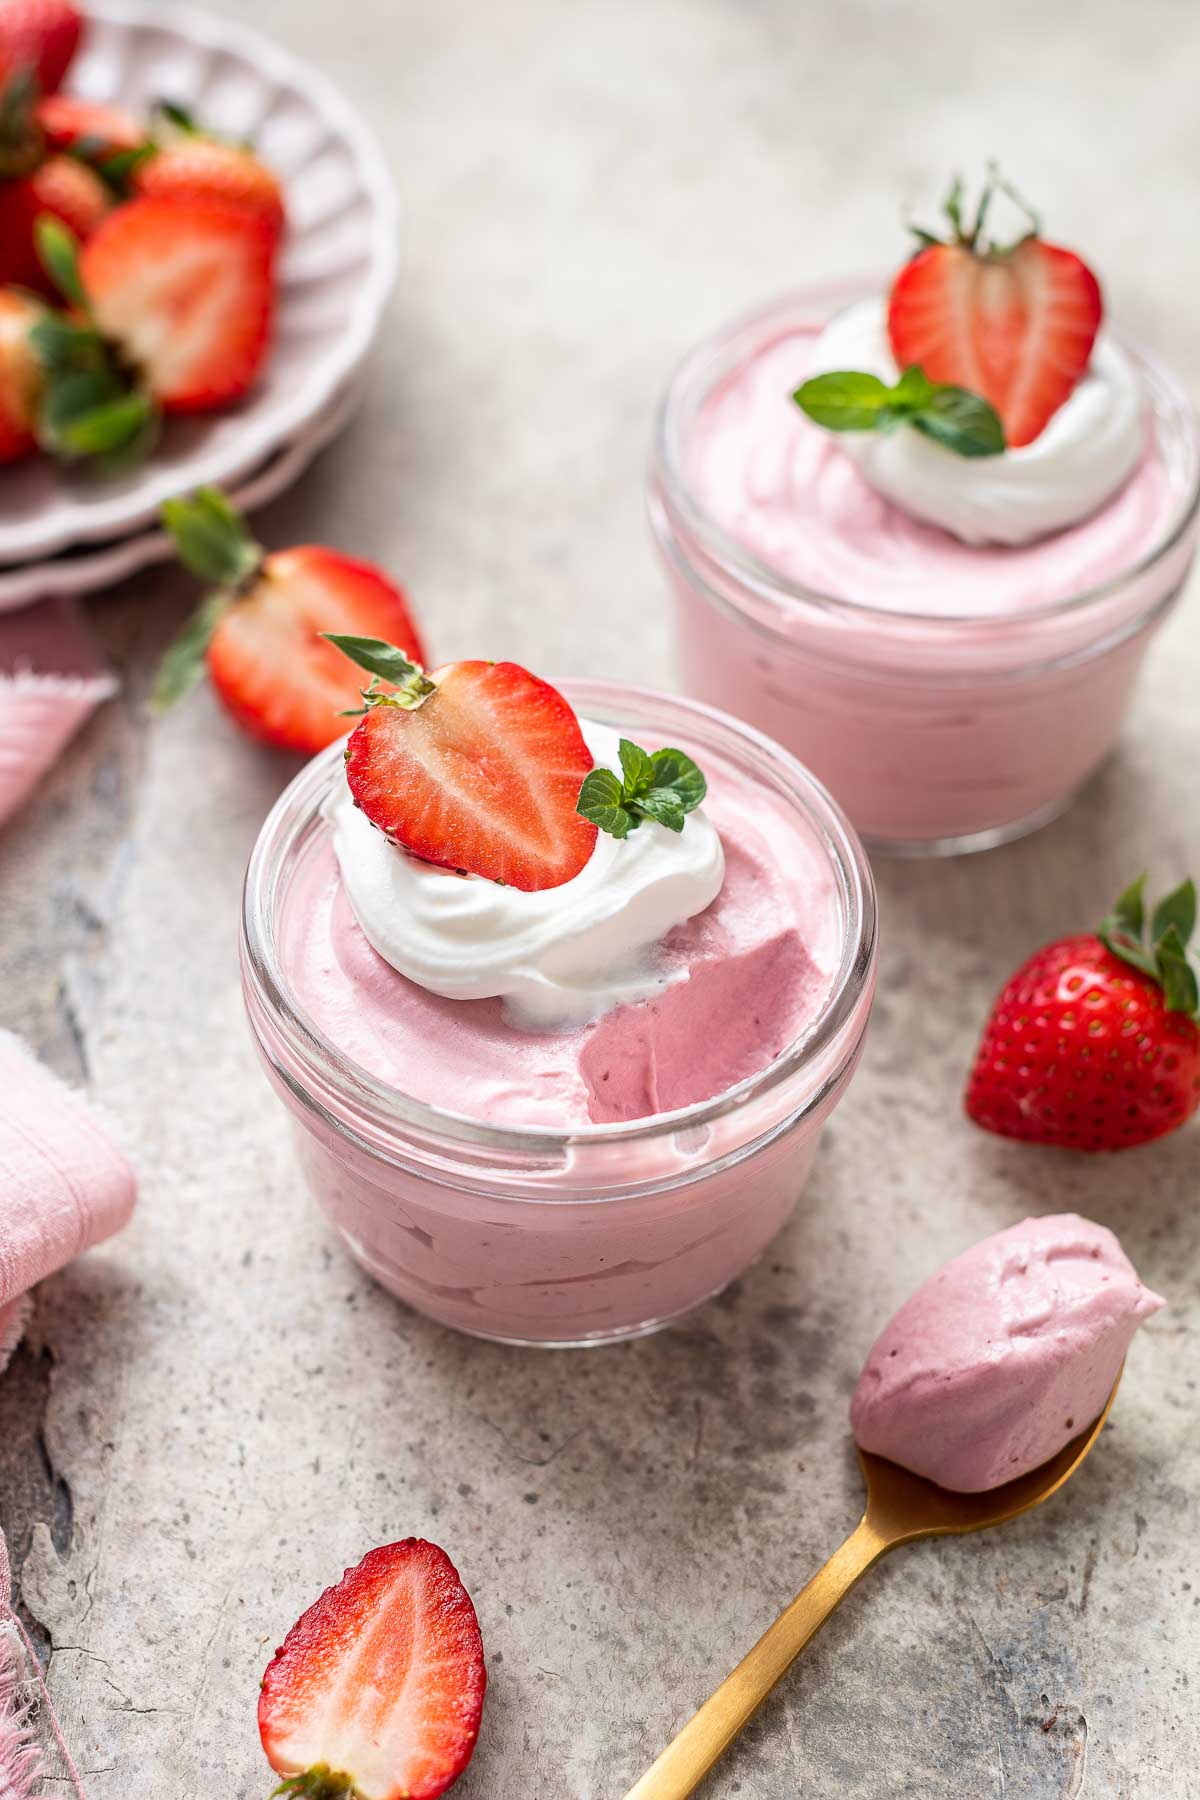 Two glass jars of strawberry mousse garnished with whipped cream and fresh strawberries.